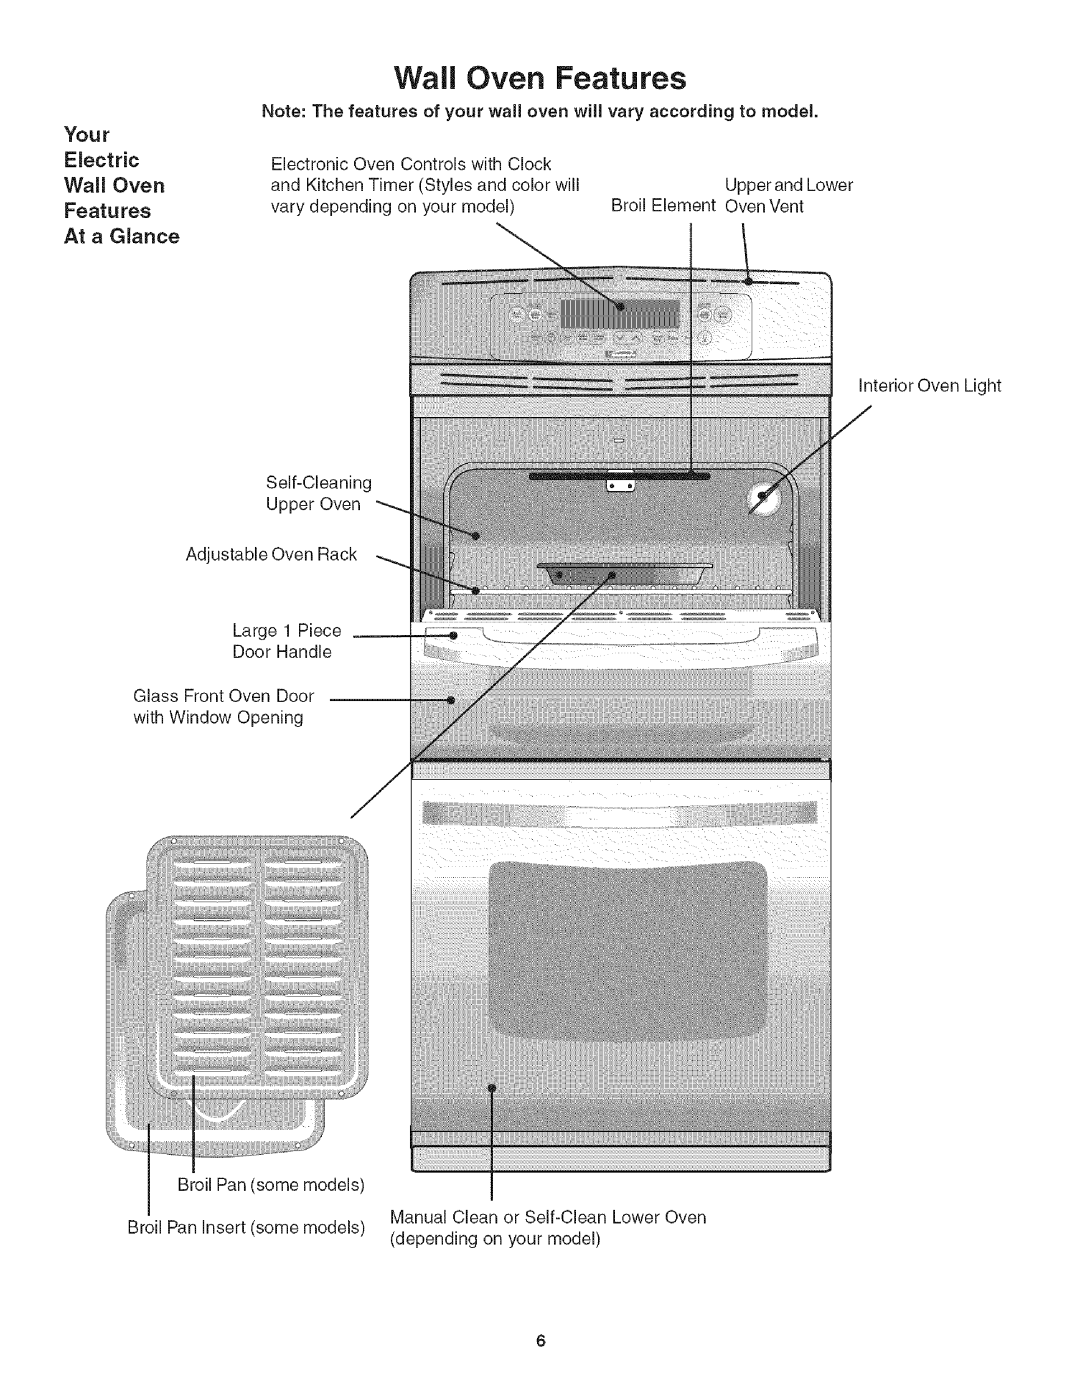 Kenmore 790.4139, 318205128 manual Wall Oven, Features, Your, Electric, At a Glance 